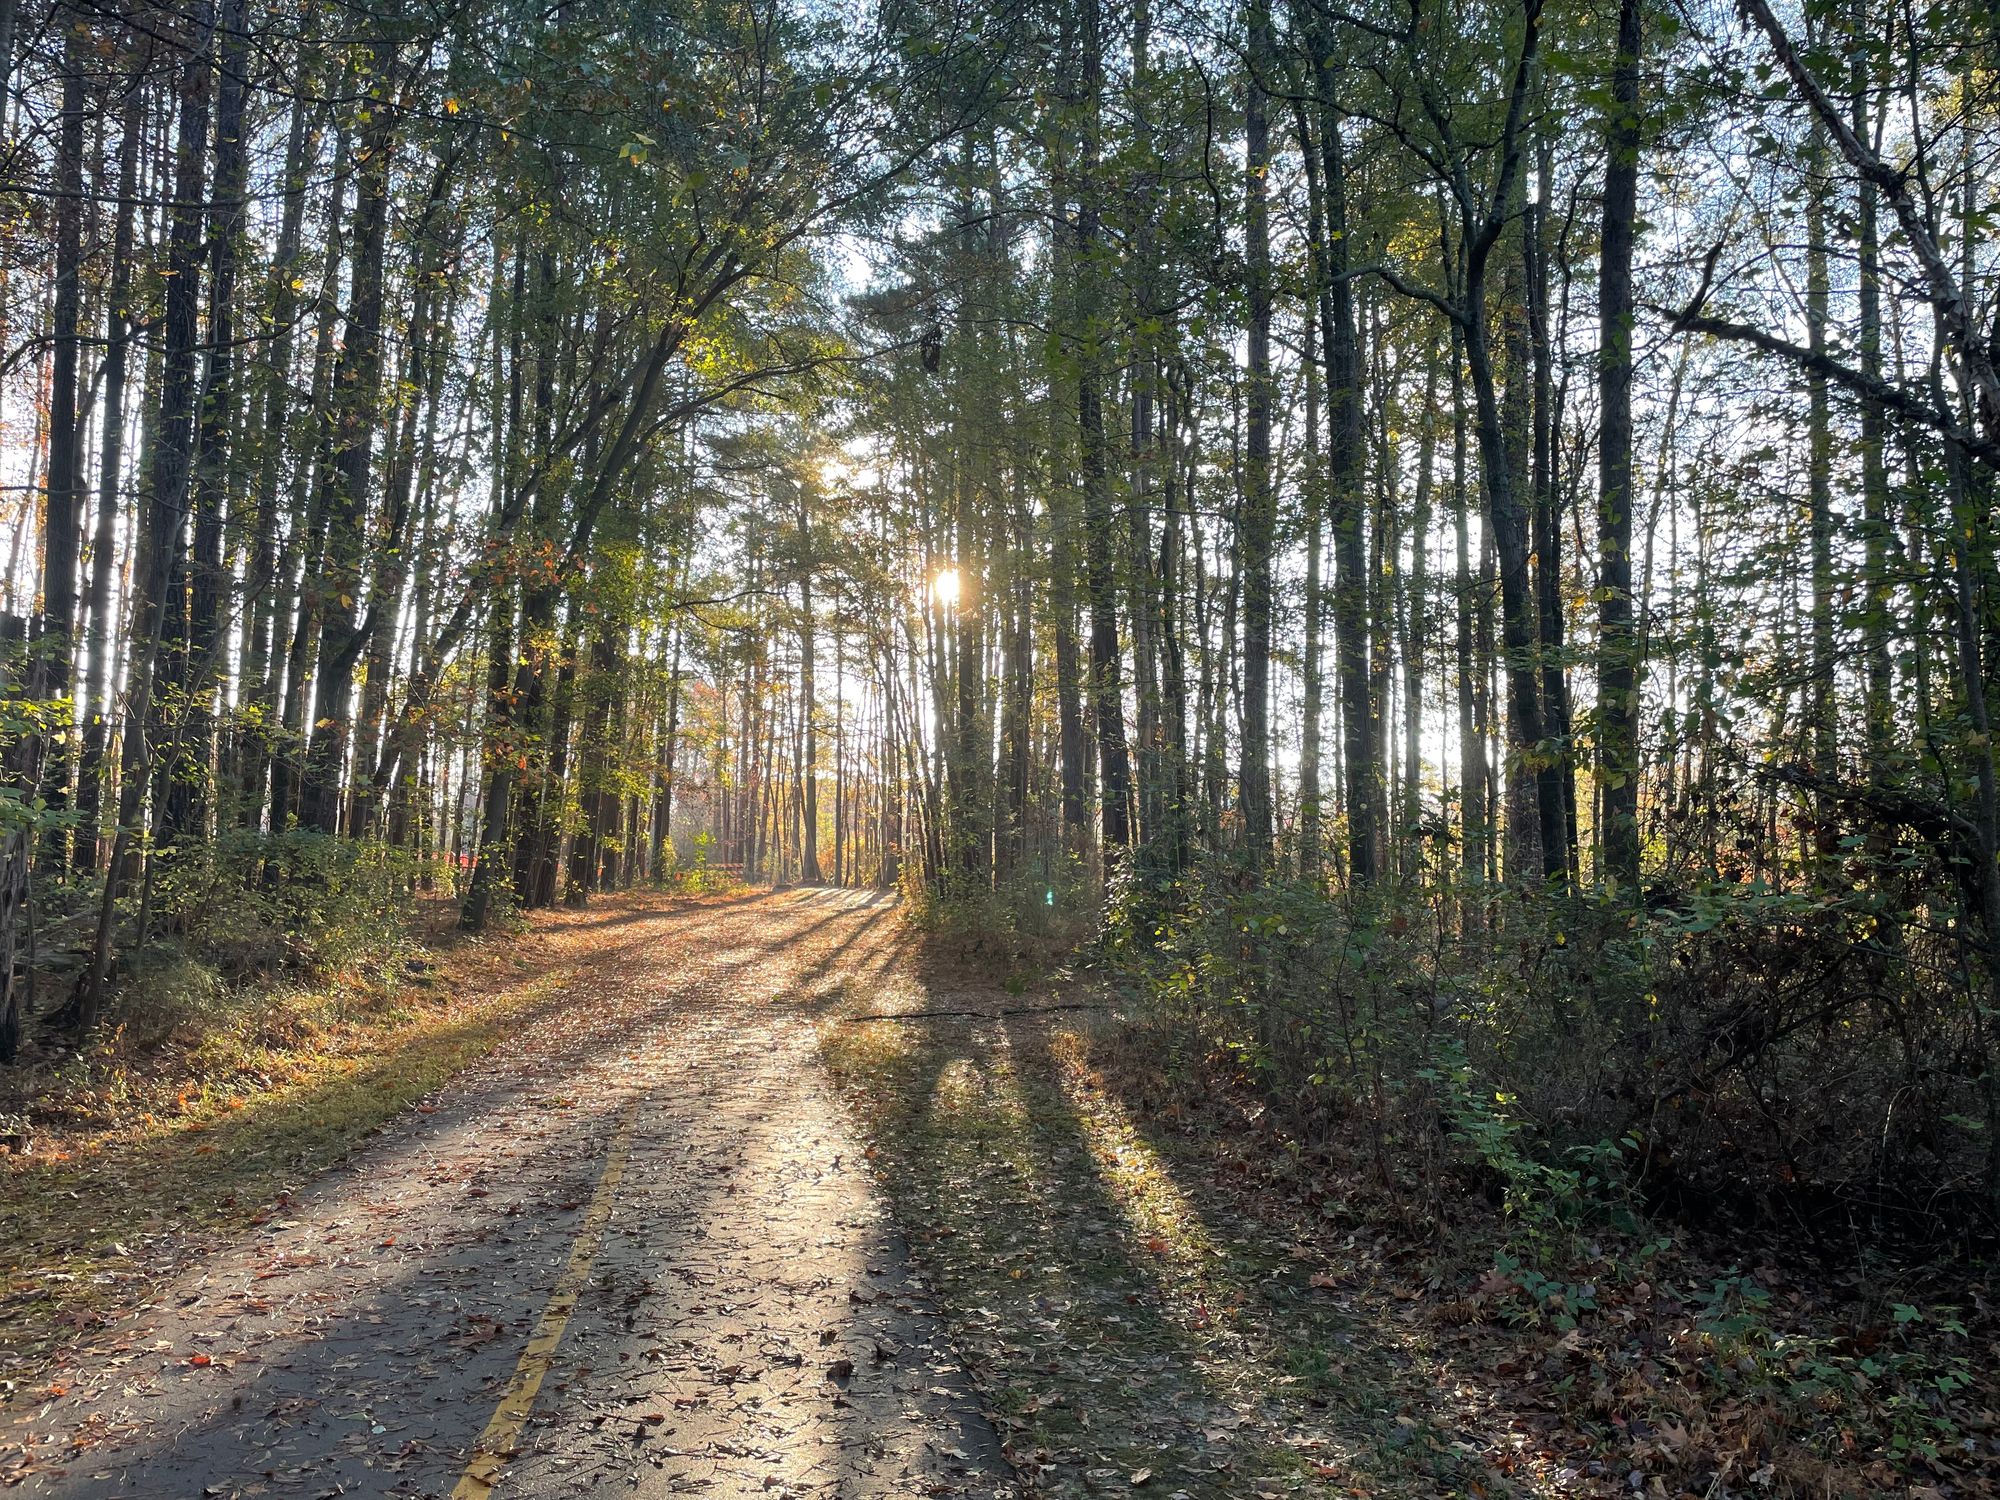 The early morning sun peeks through the forest. A paved bicycle path leads deeper into the forest, toward the sun.